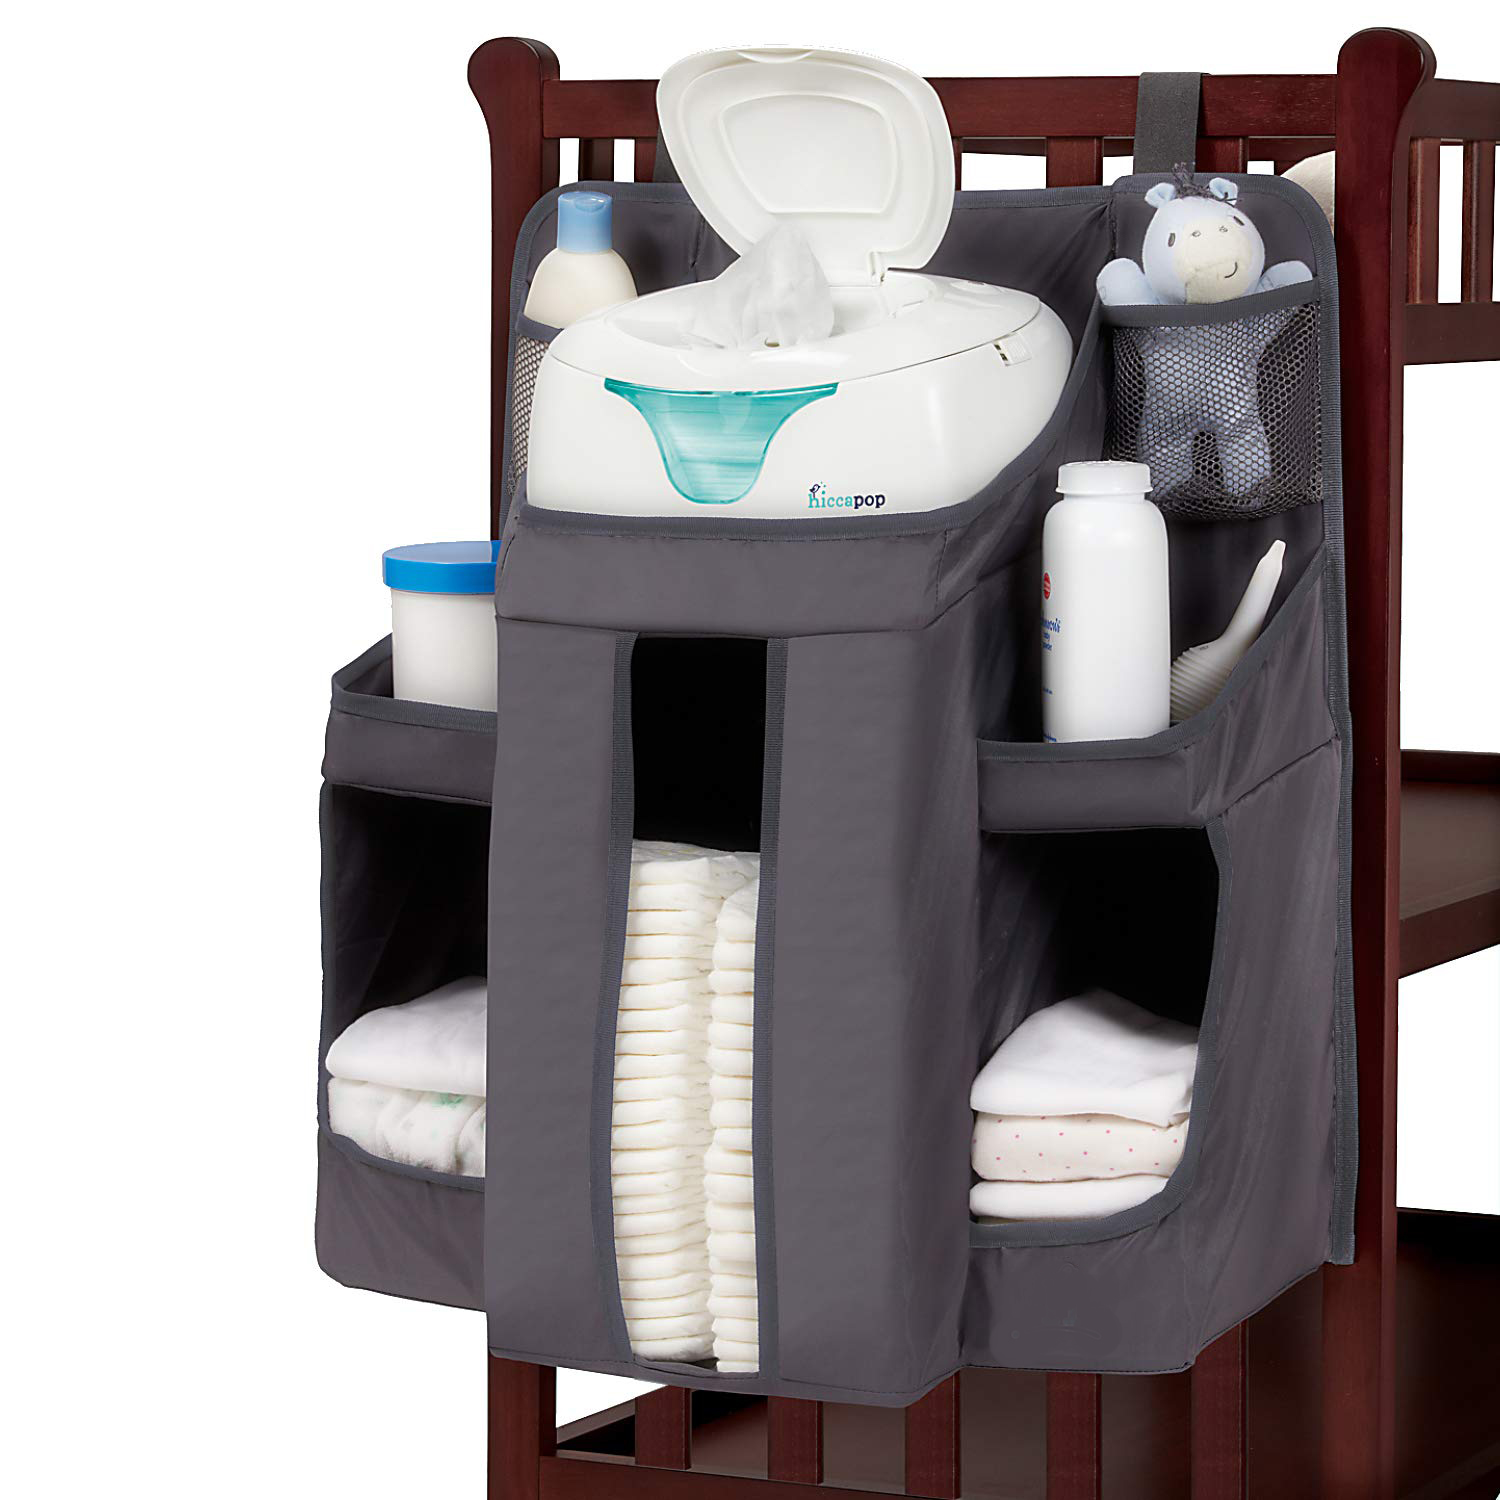 Acbags.com Nursery Organizer and Baby Diaper Caddy | Hanging Diaper Organization Storage for Baby Essentials | Hang on Crib, Changing Table or Wall